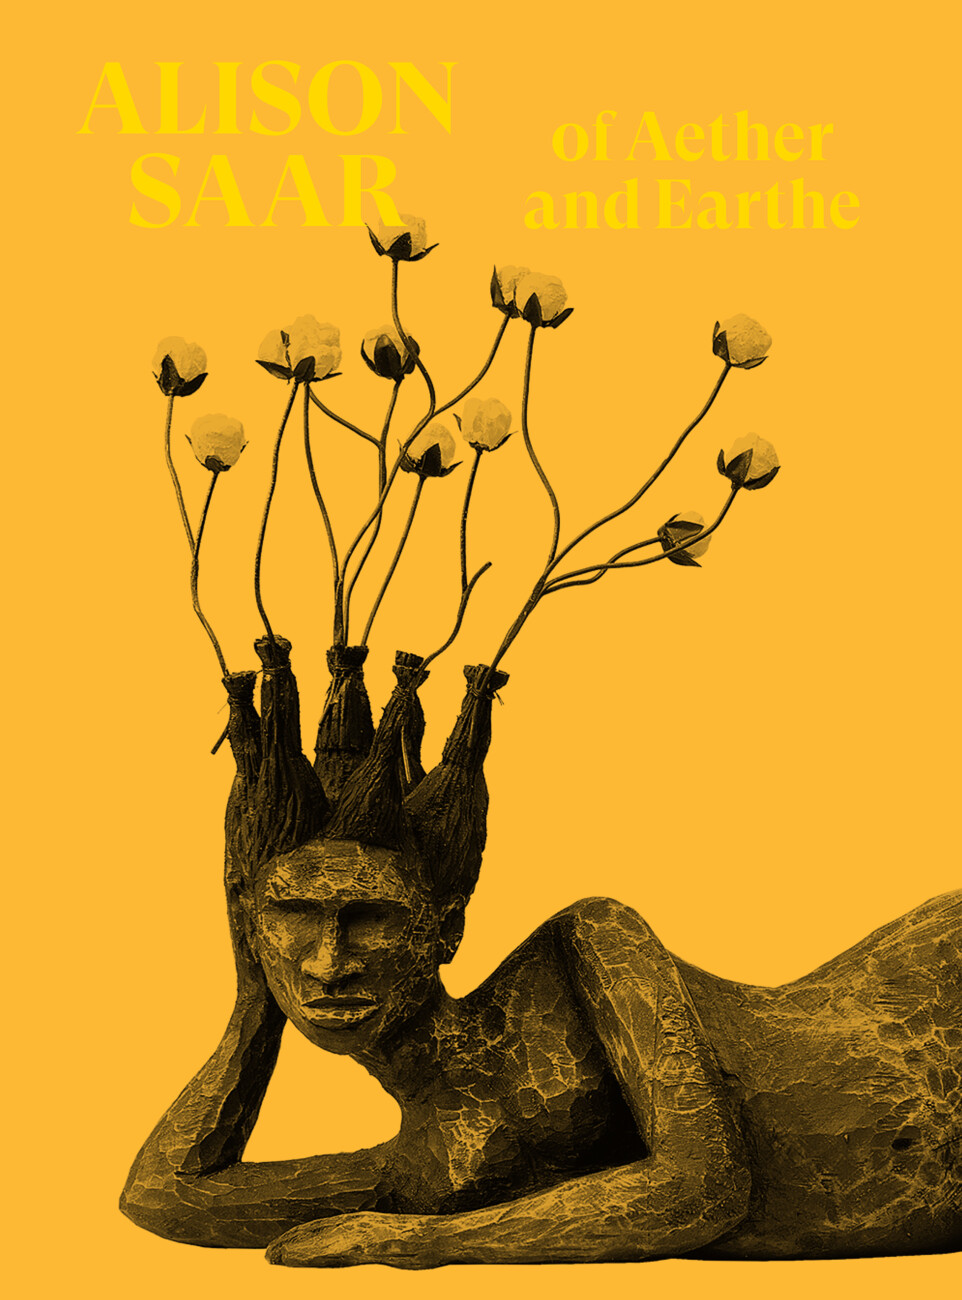 yellow book cover with image of sculpture figure with flowers growing from hair tied together